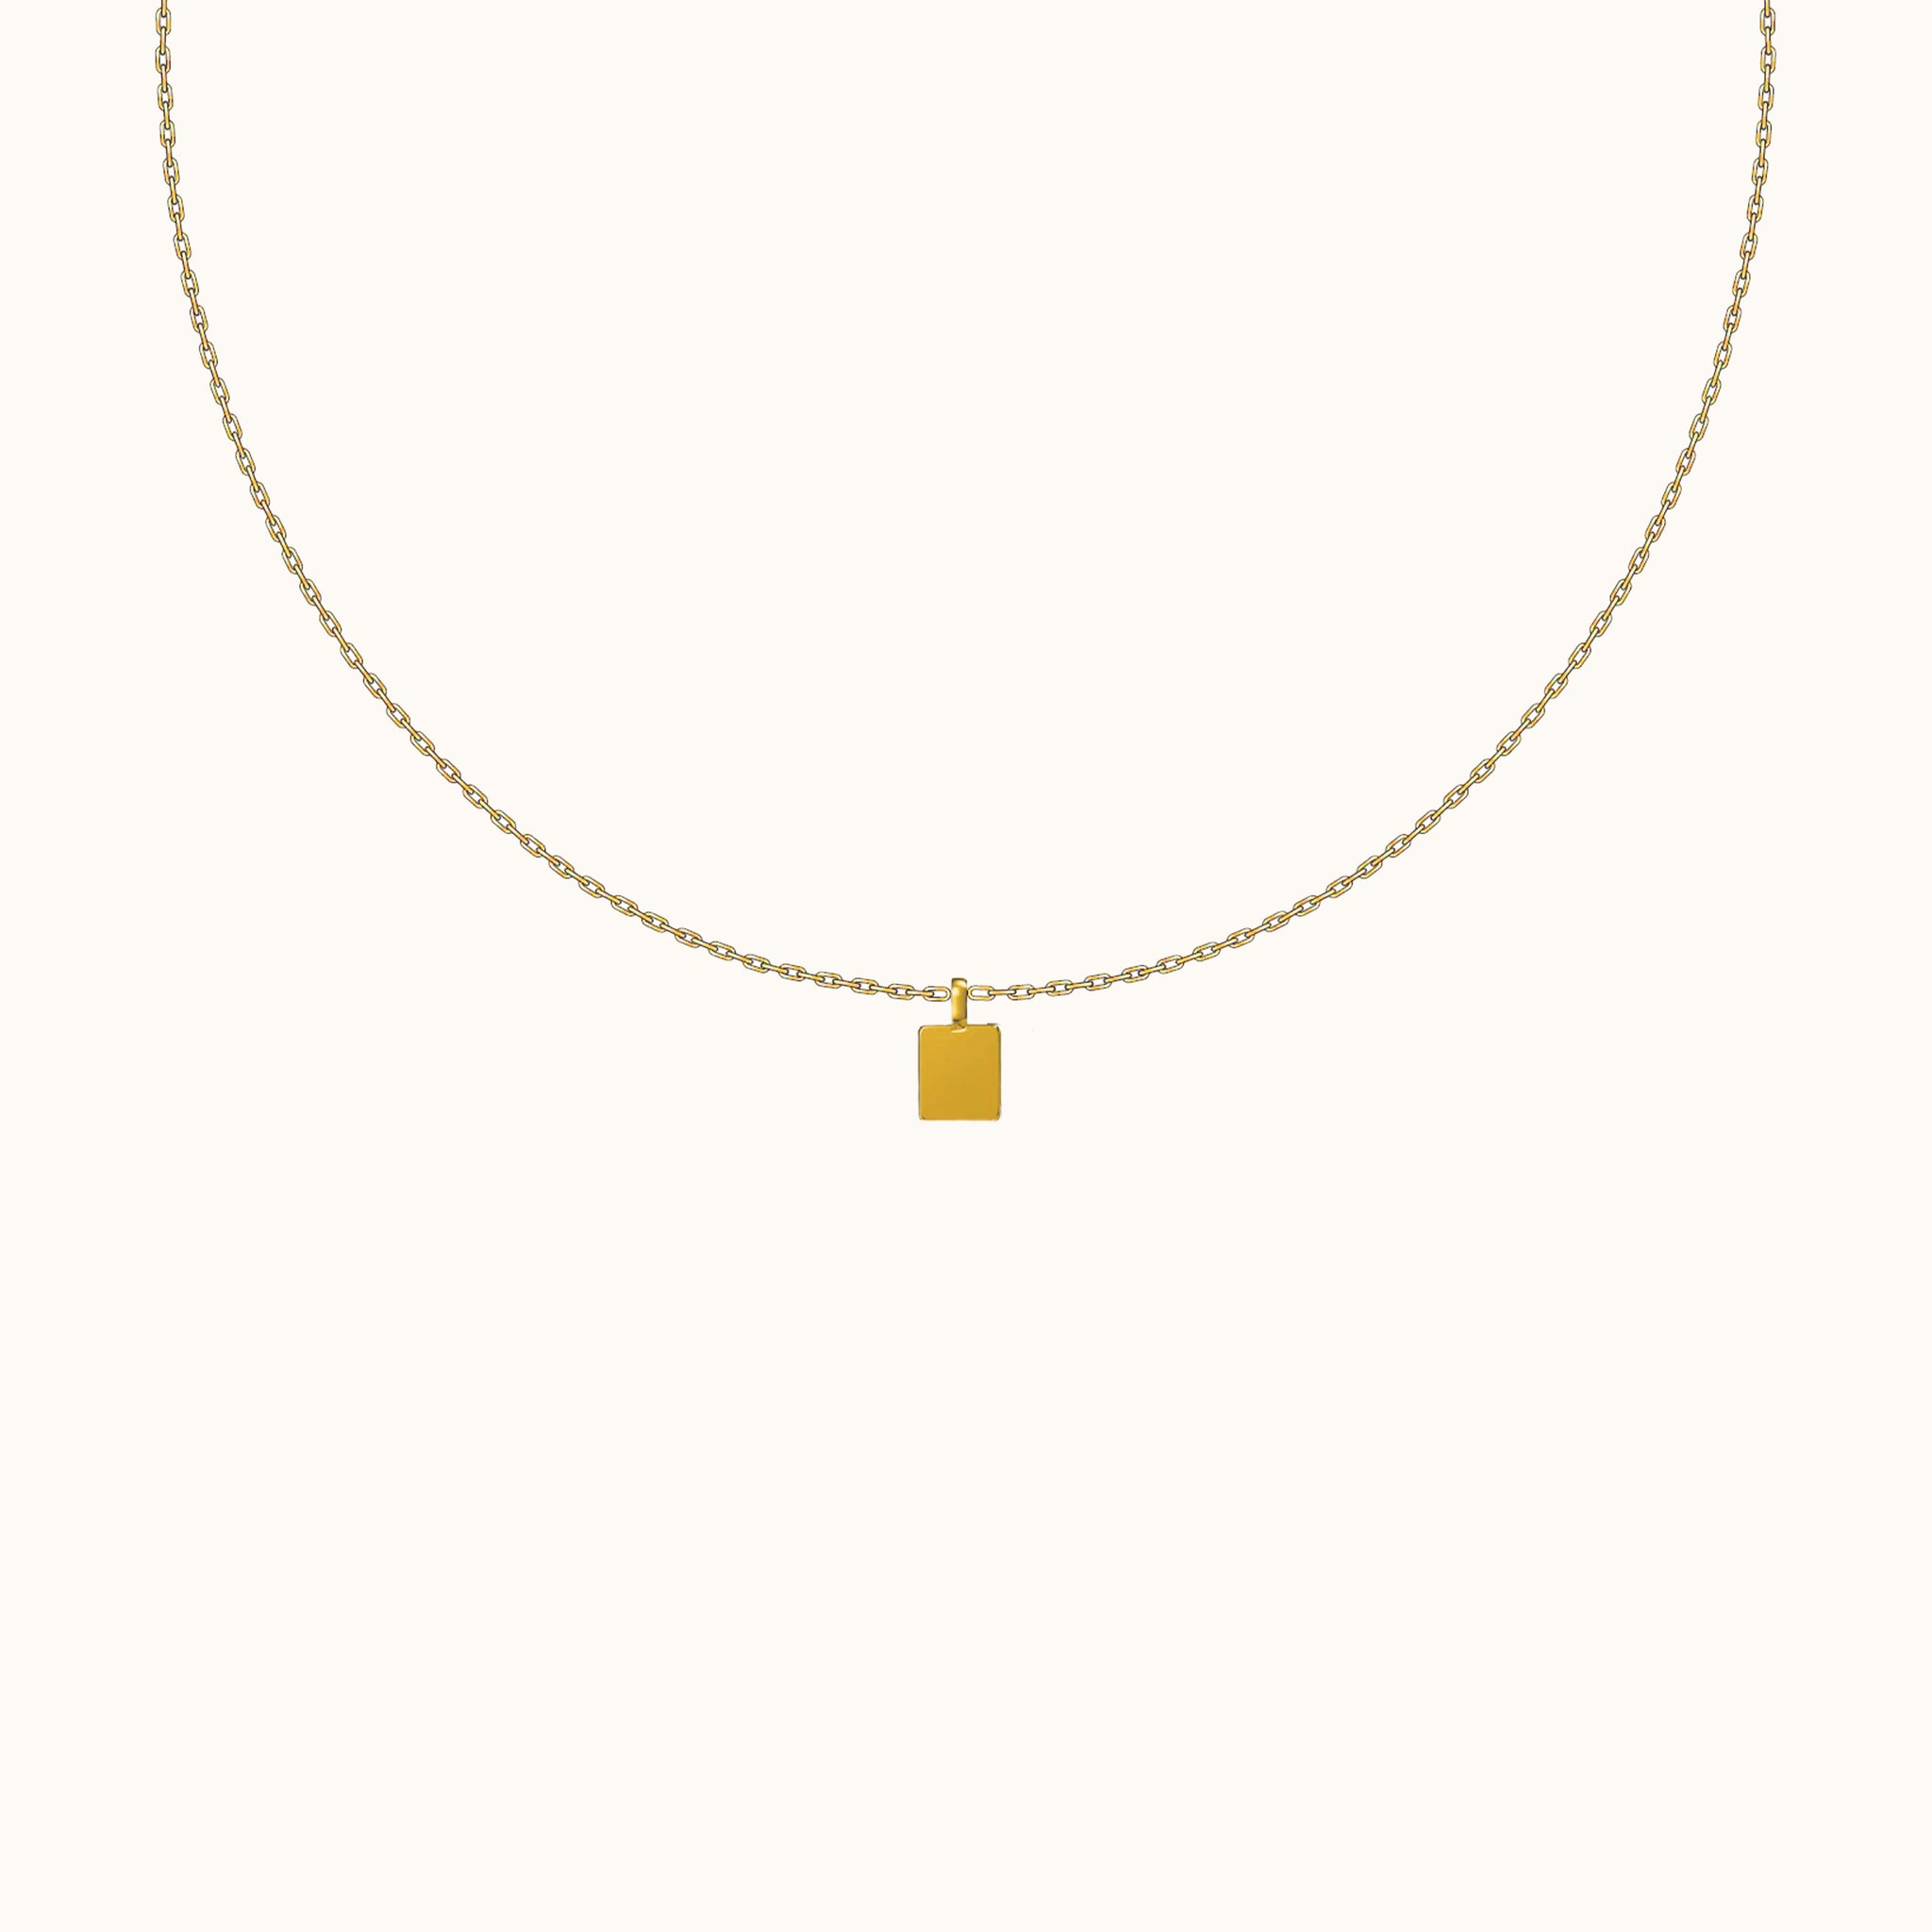 Classic Gold Cube Thick Square Tag Necklace with Thin Cable Chain by Doviana